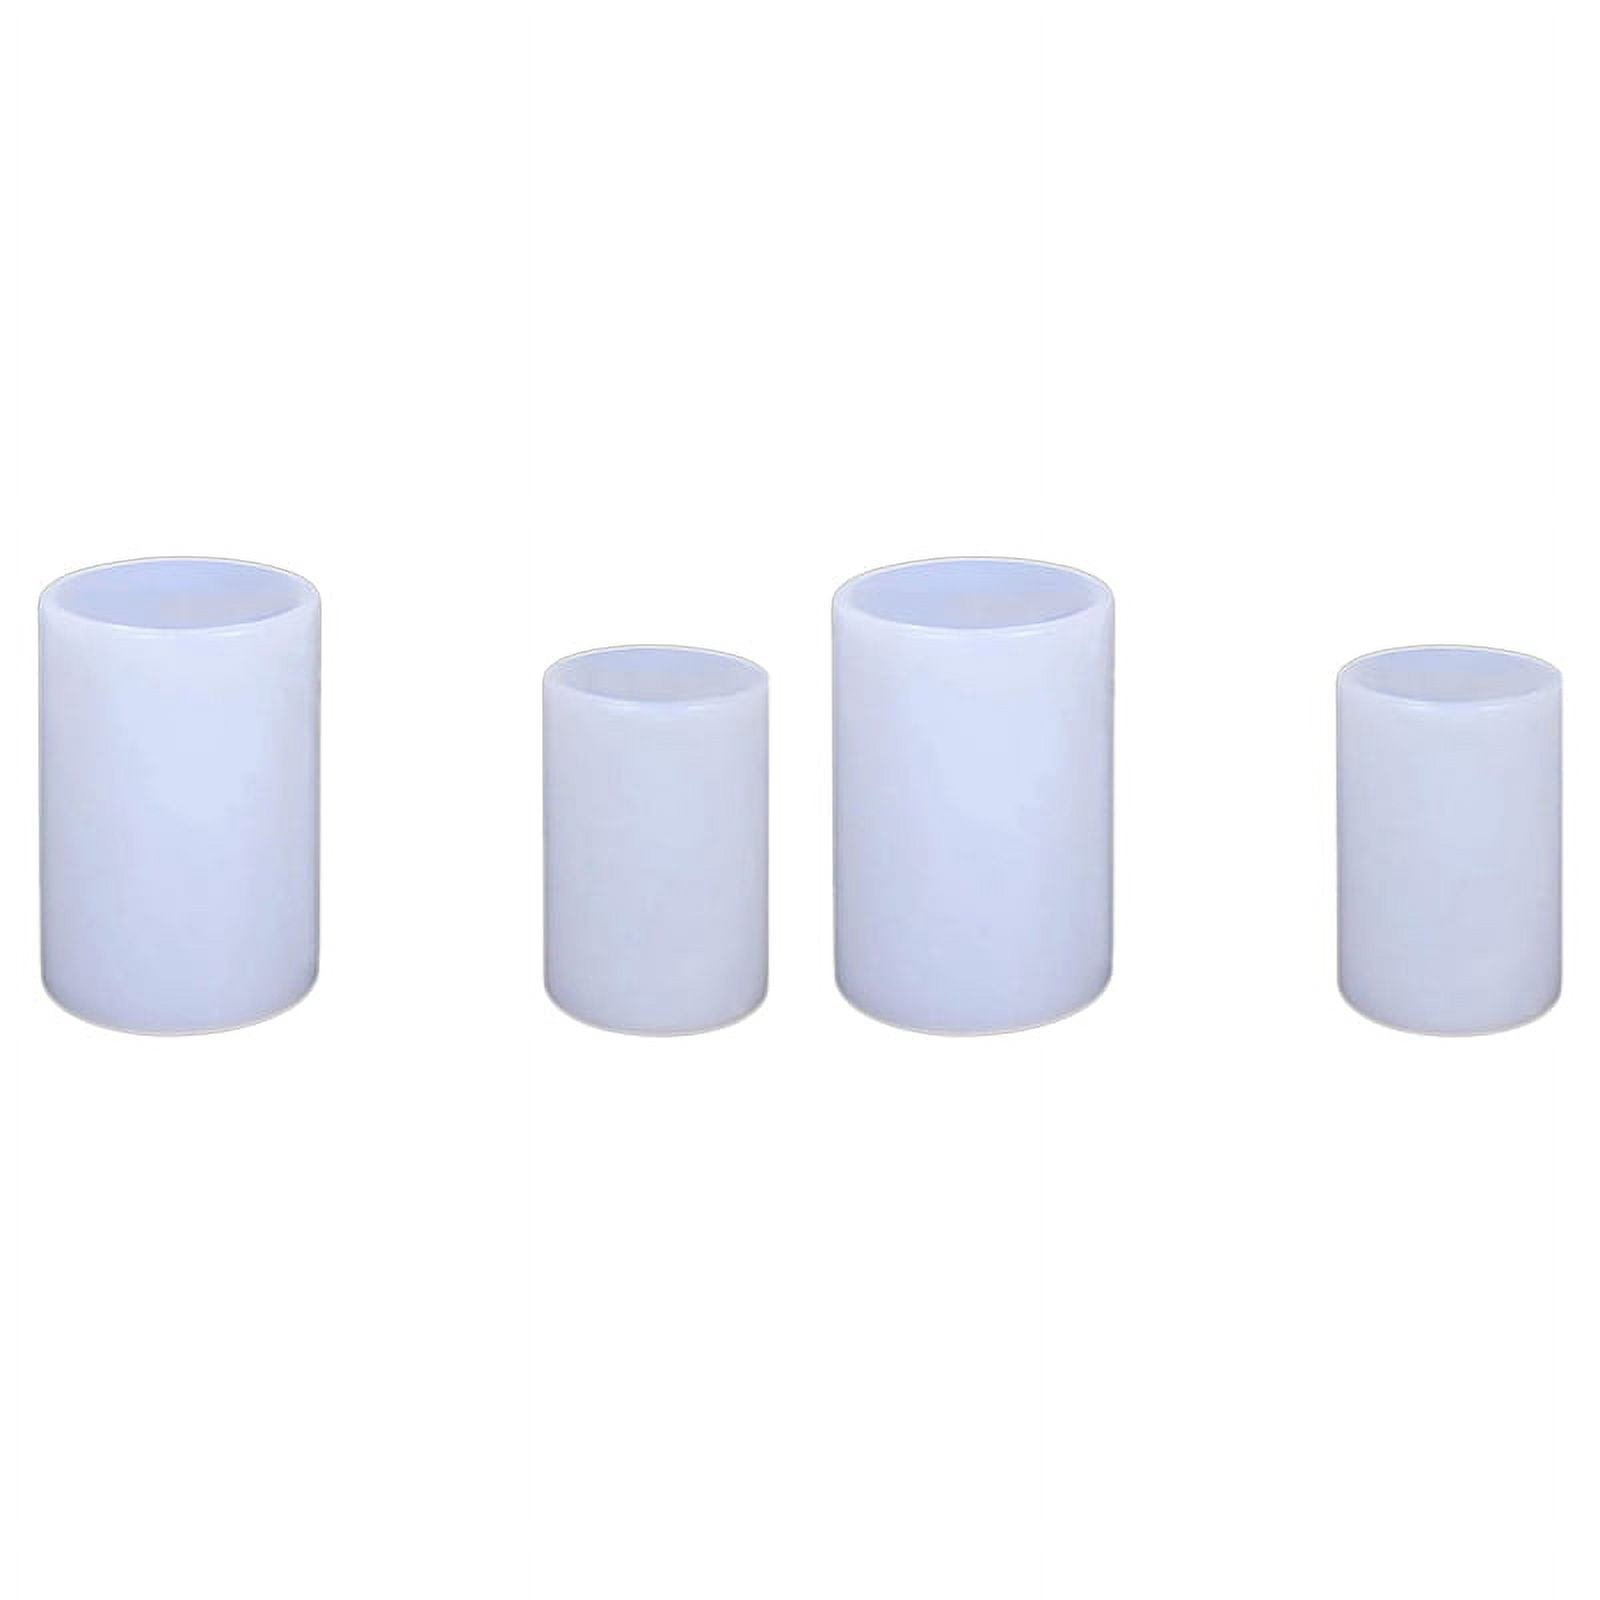 Cheers.US Trapezoidal Candle Mold Set- Pillar Candle Molds -Perfect for  Making Emergency Candles, Chime Candles, Table Candles,Church Candle Making